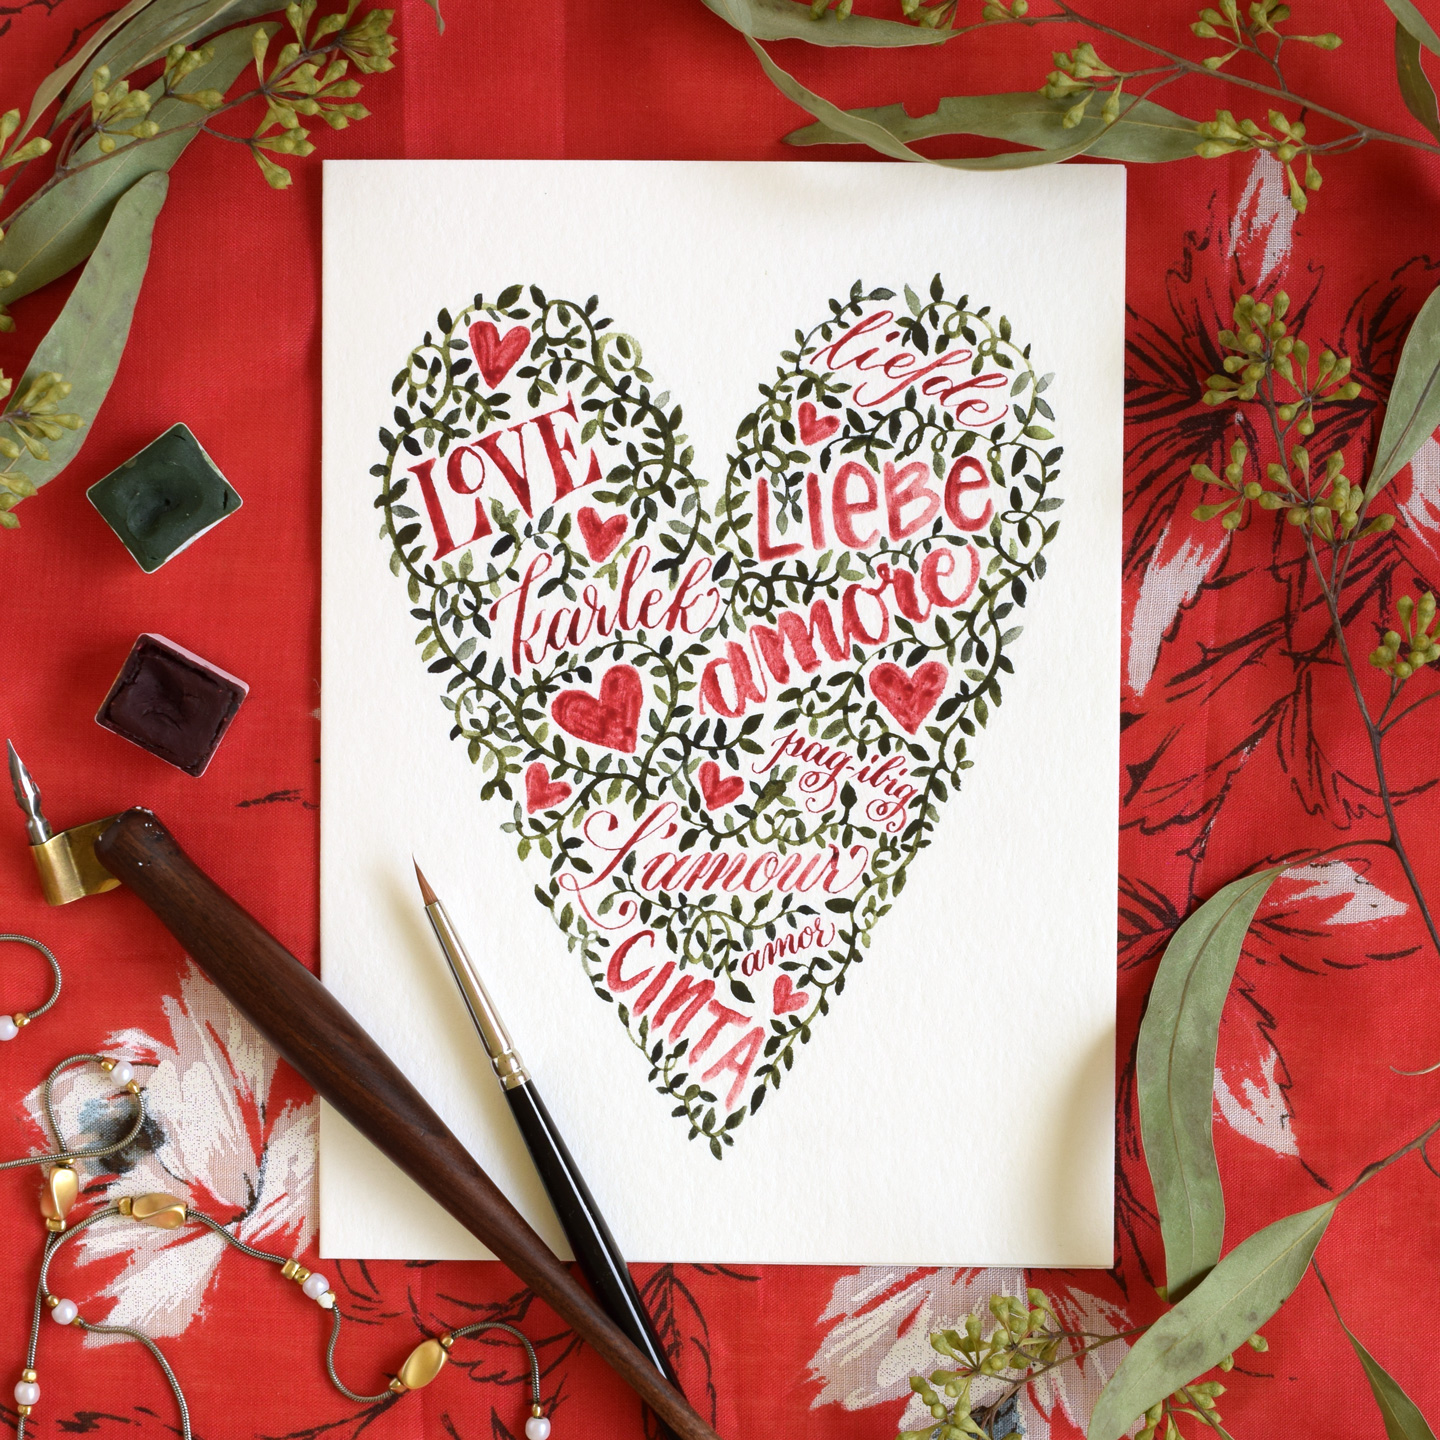 Words and Vines Valentine’s Day Card Tutorial